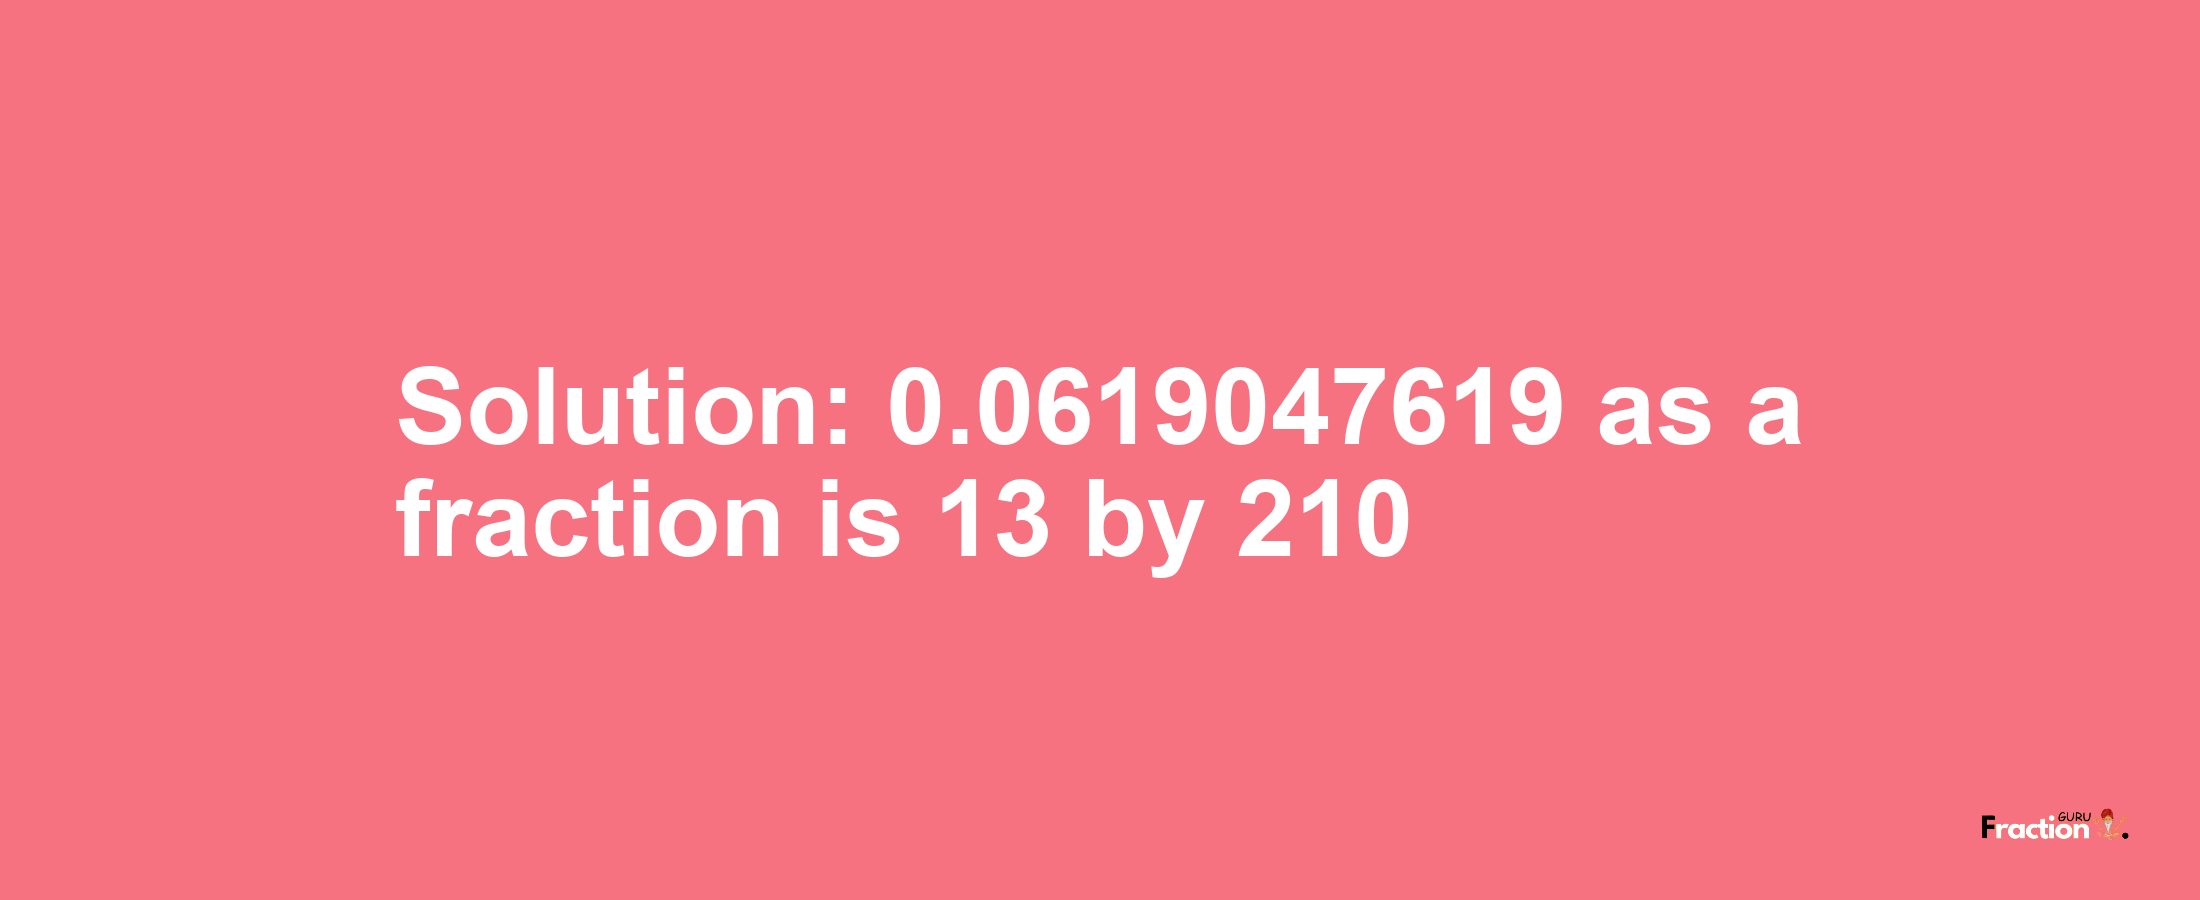 Solution:0.0619047619 as a fraction is 13/210